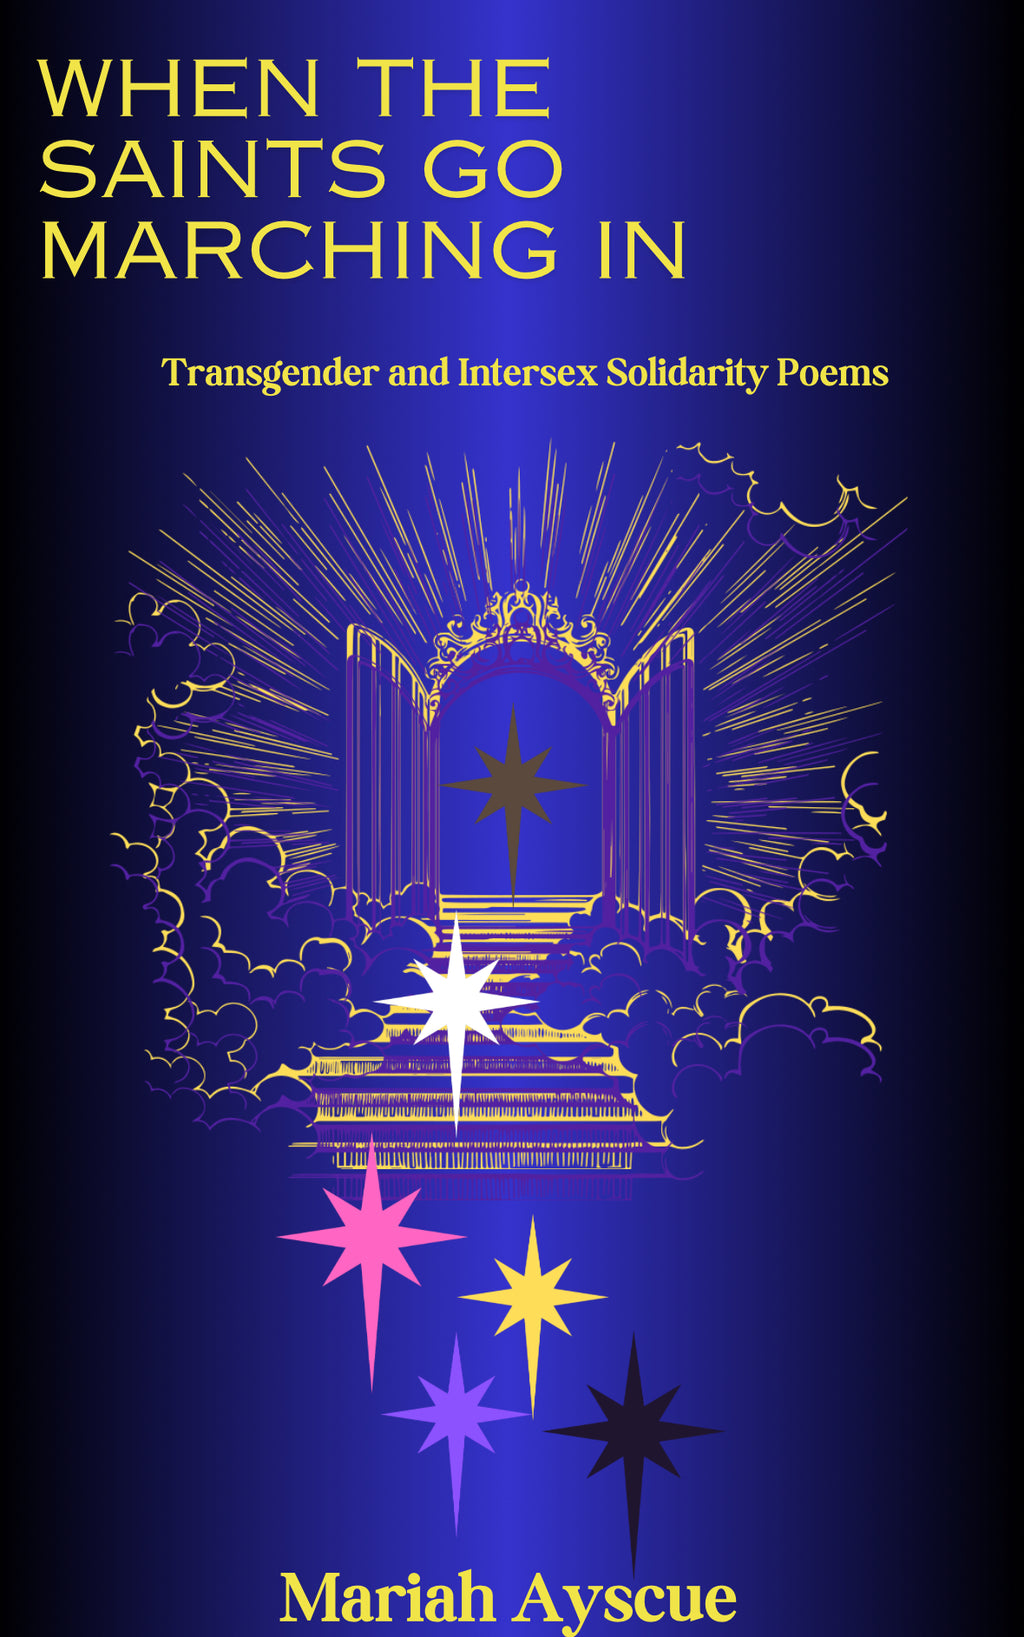 (PREORDER) WHEN THE SAINTS GO MARCHING IN: Transgender & Intersex Solidarity Poems by Mariah Ayscue